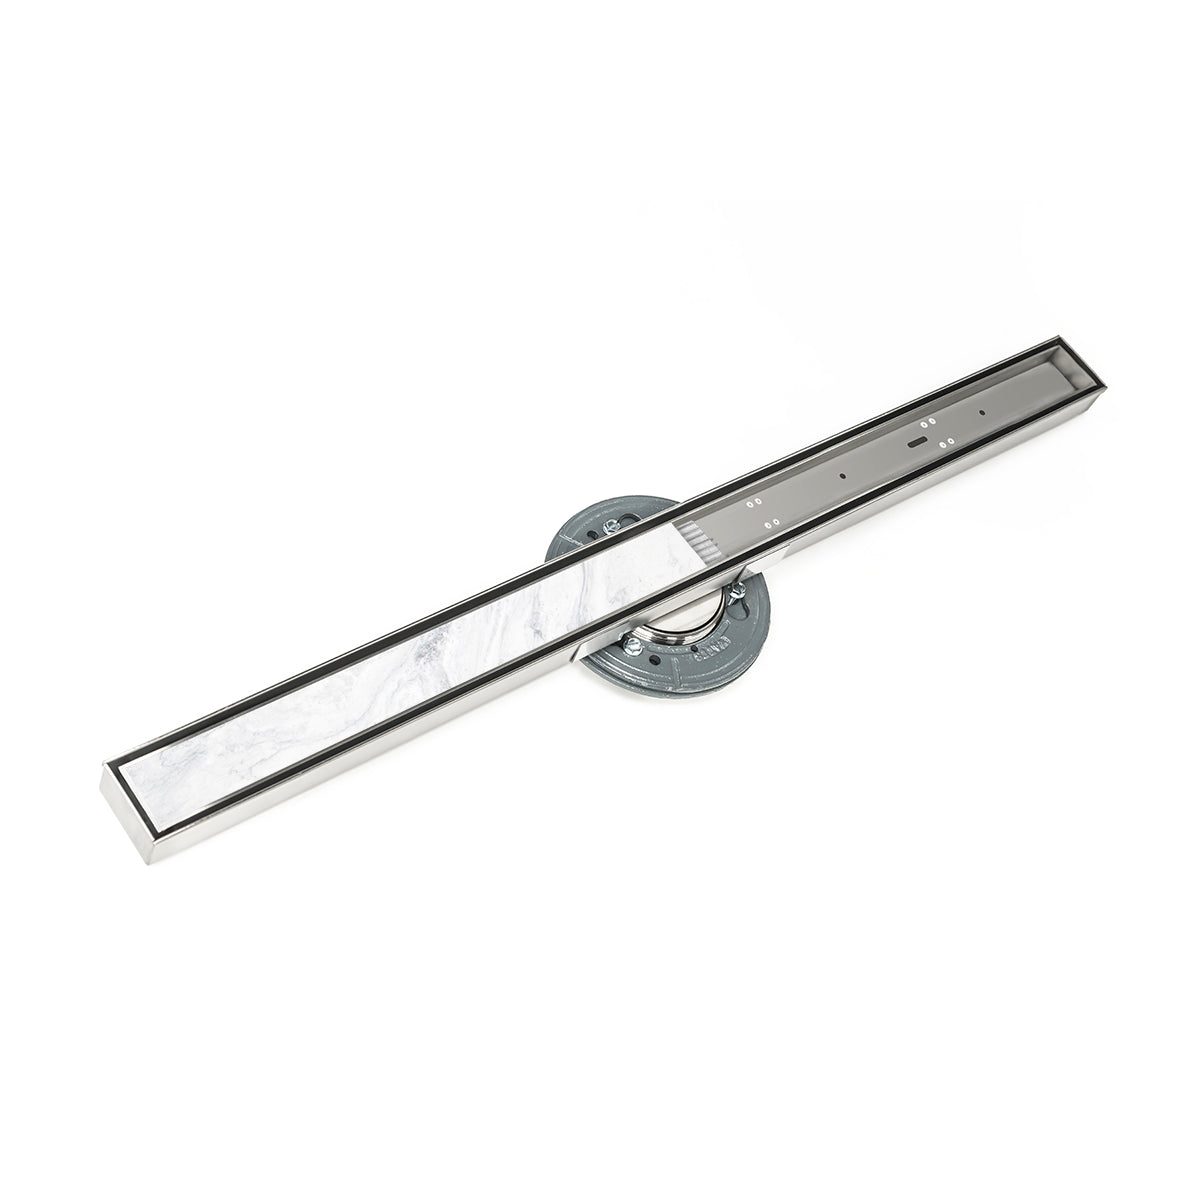 Infinity Drain 40" S-Stainless Steel Series High Flow Site Sizable Linear Drain Kit with Tile Insert Frame with PVC Drain Body, 3" Outlet